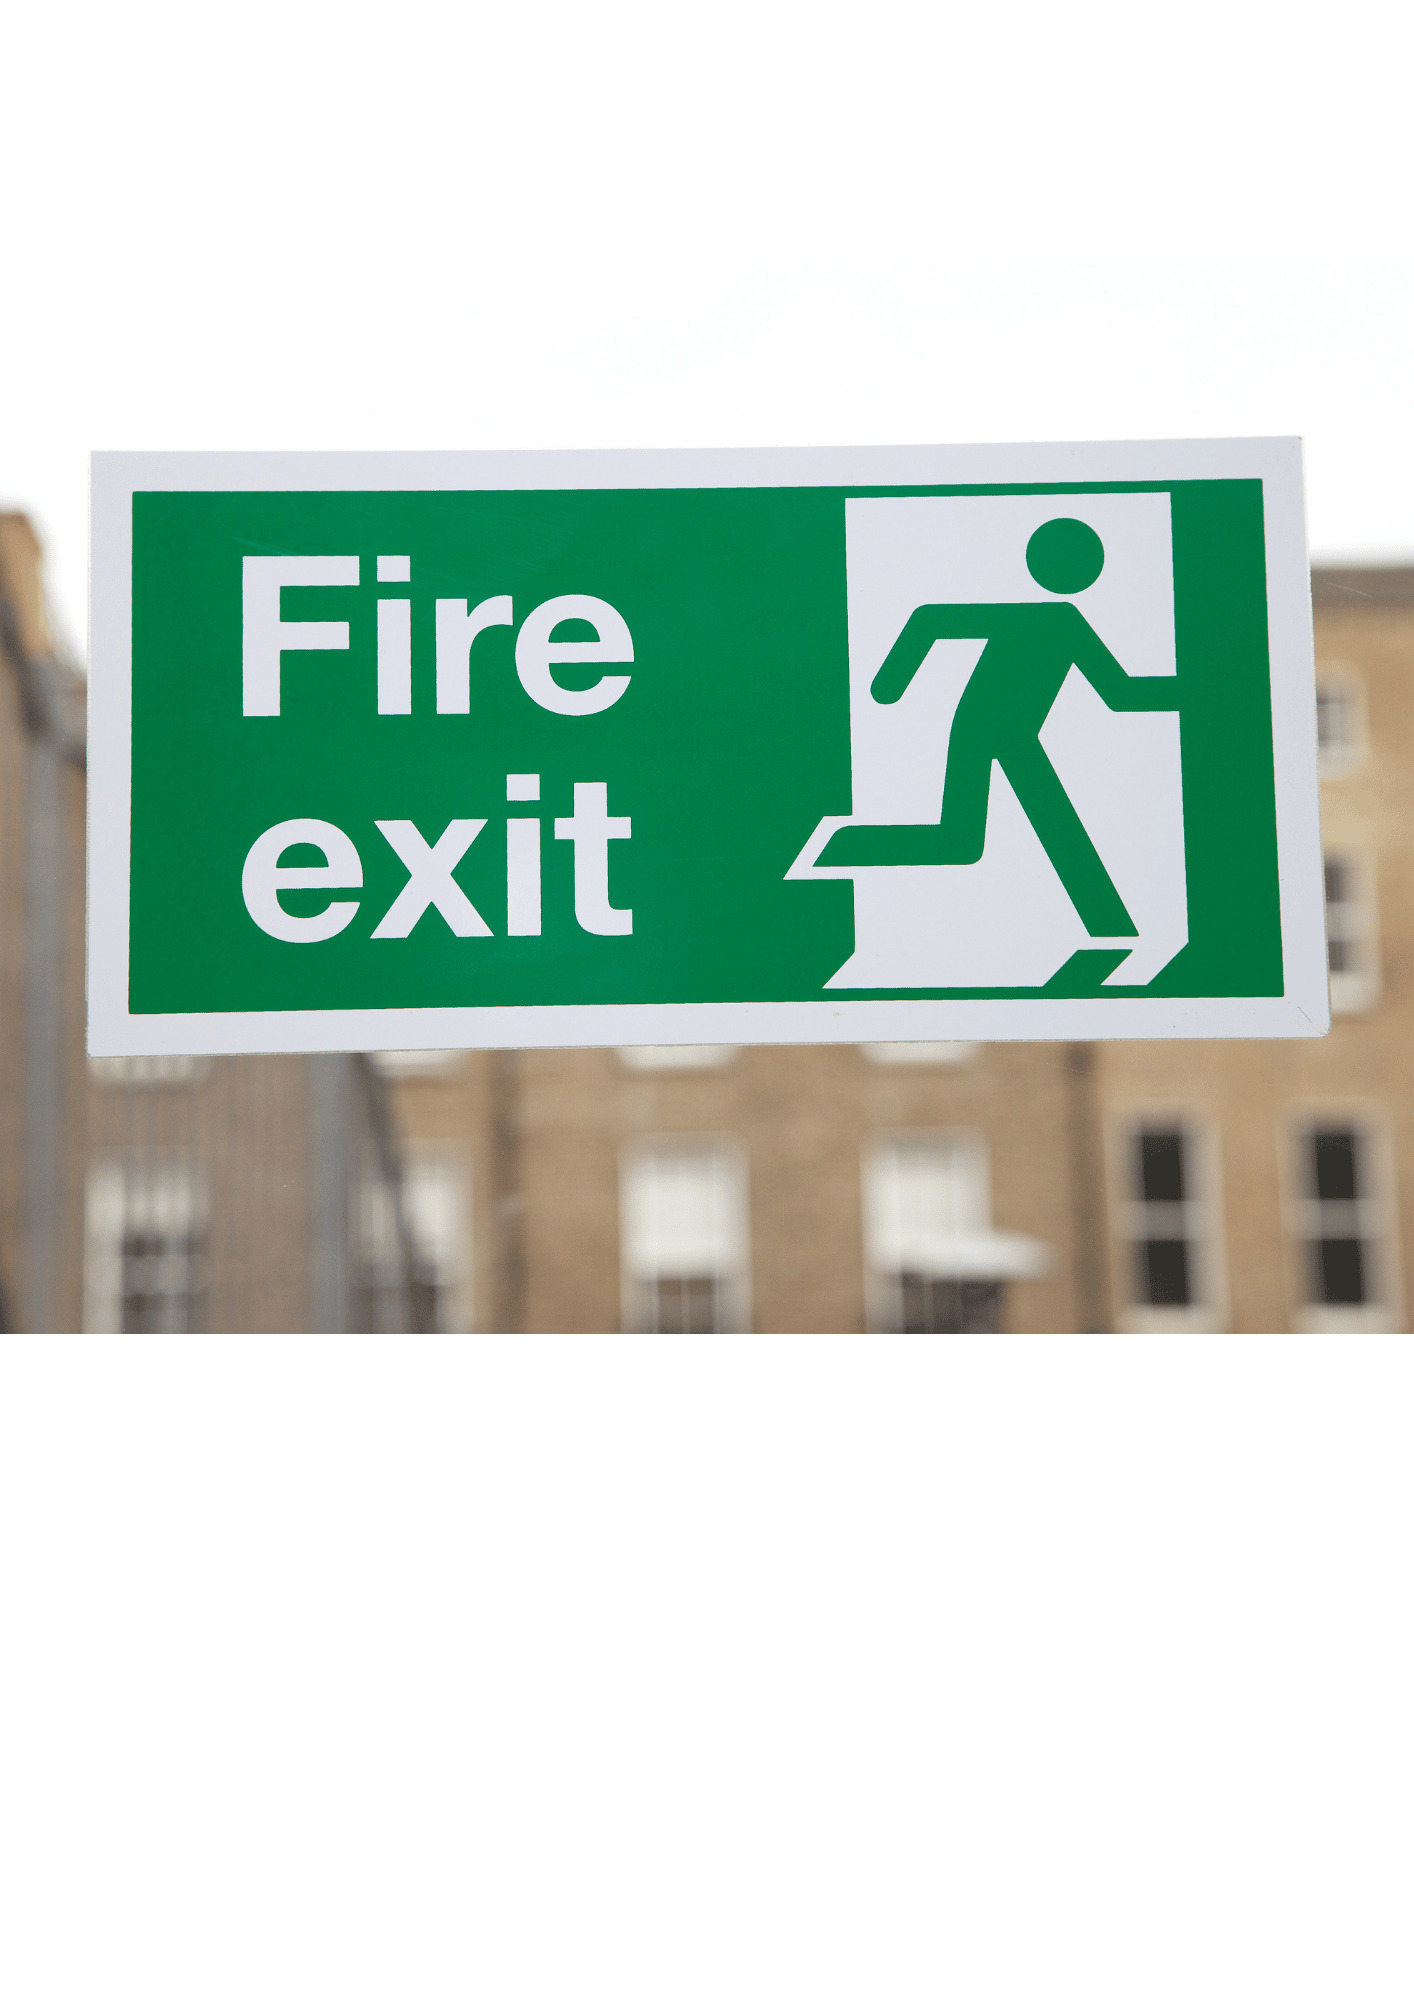 Fire exit sign on clear window